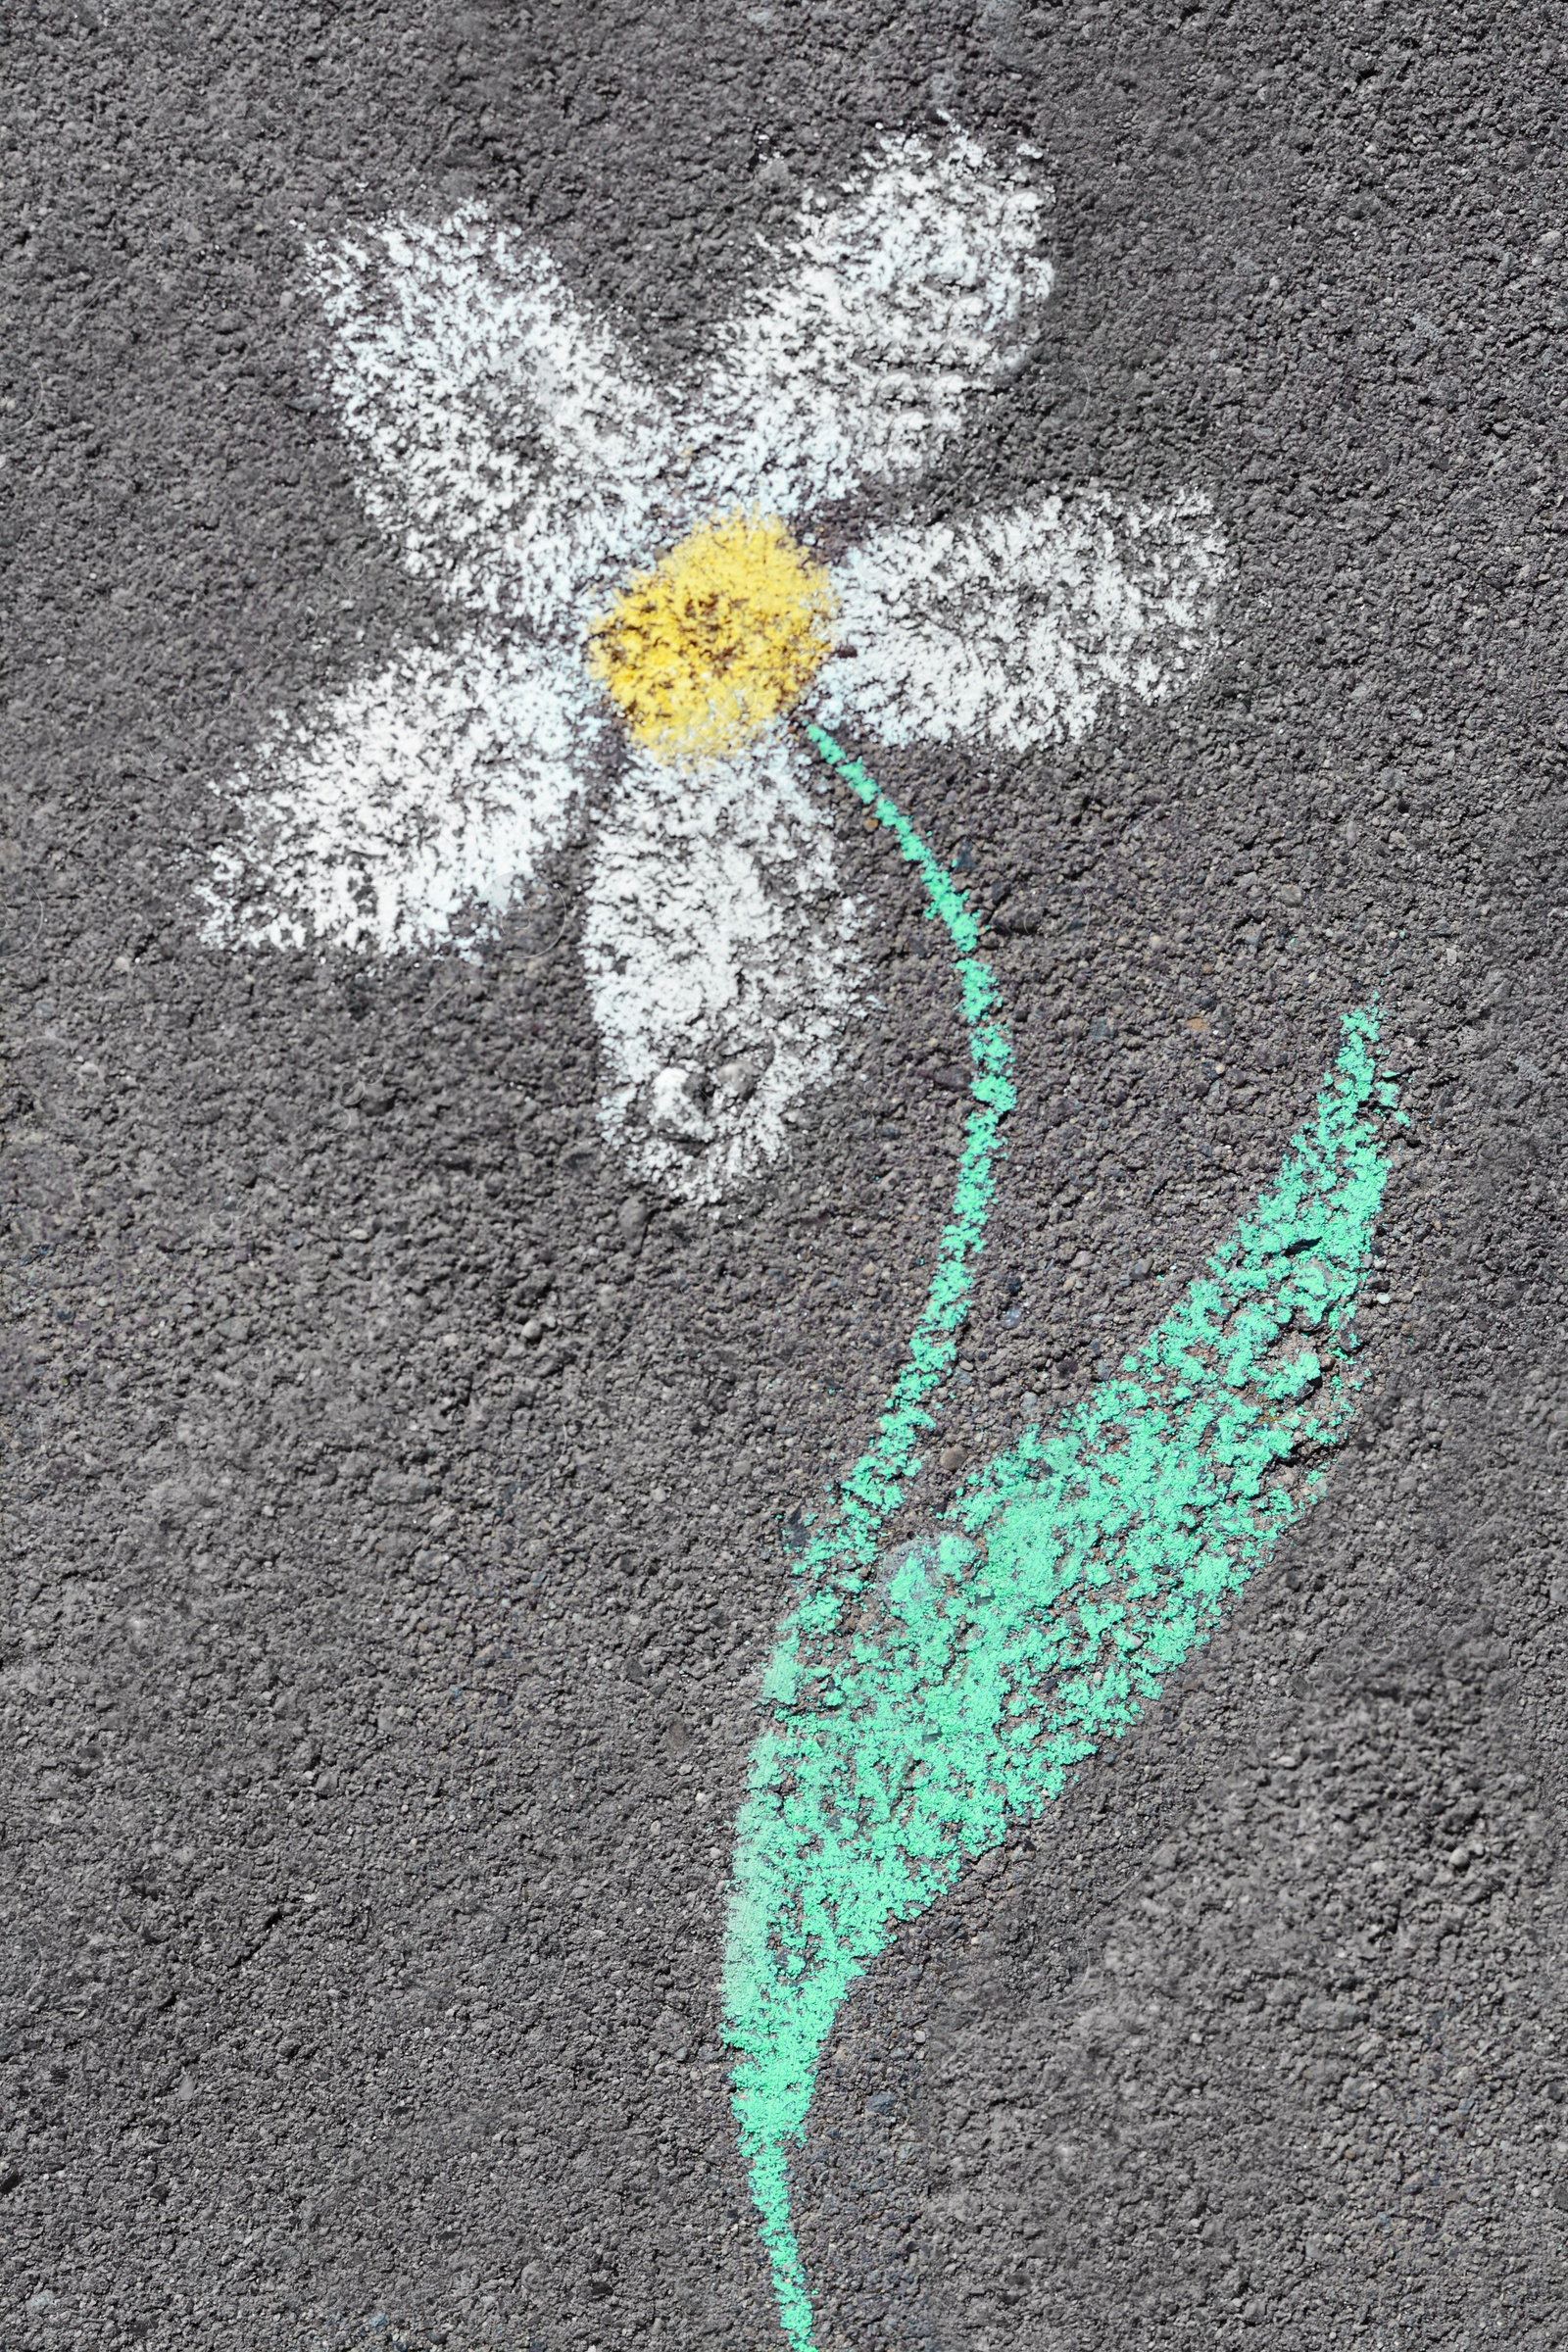 Photo of Flower drawn with colorful chalks on asphalt outdoors, top view